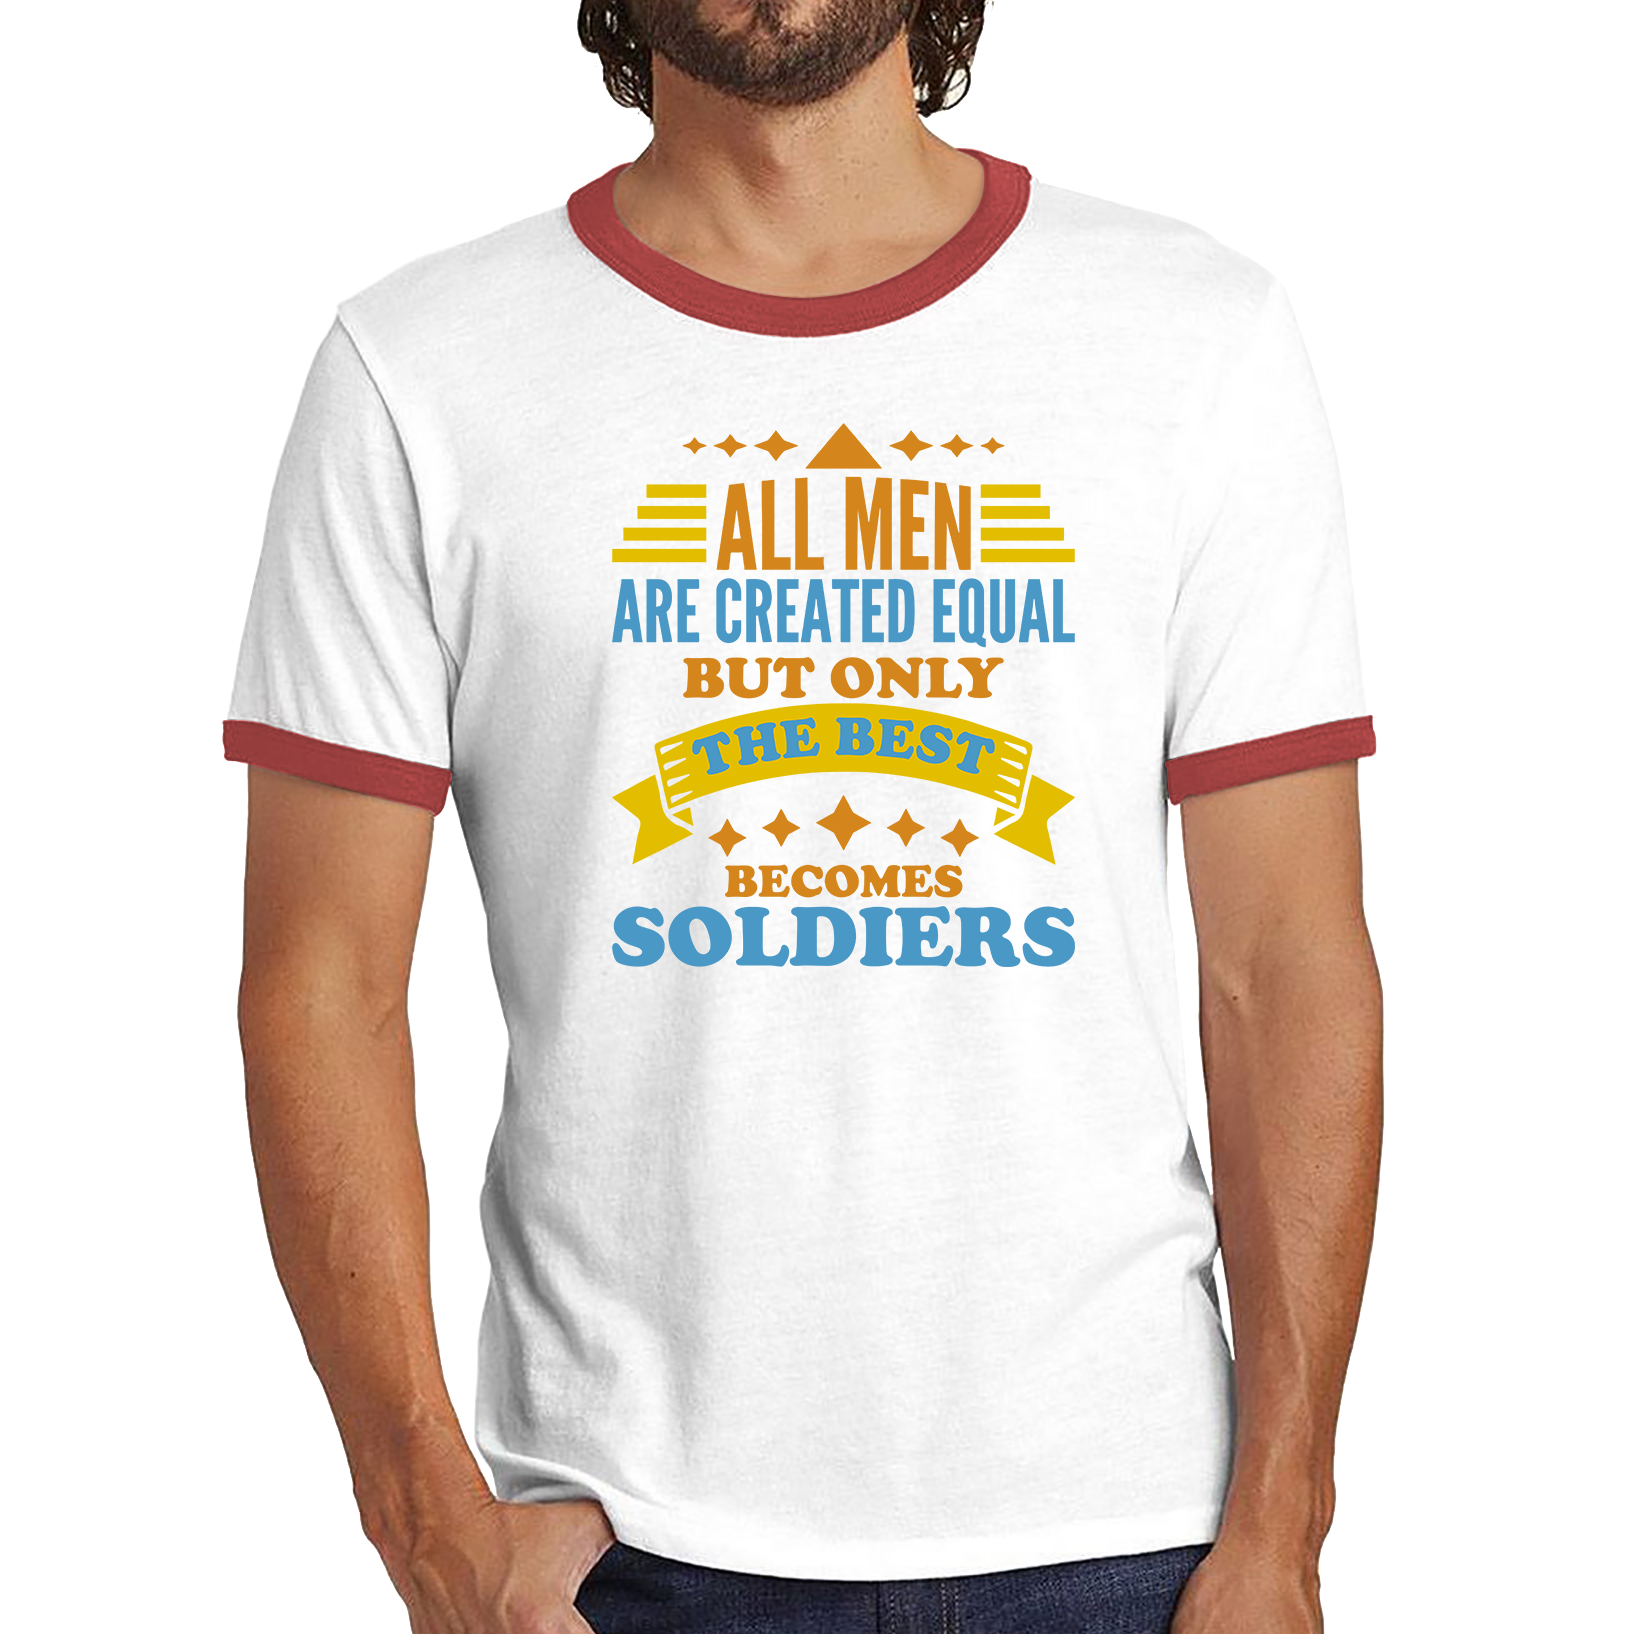 All Men Are Created Equal But Only The Best Becomes Soldiers Ringer T Shirt